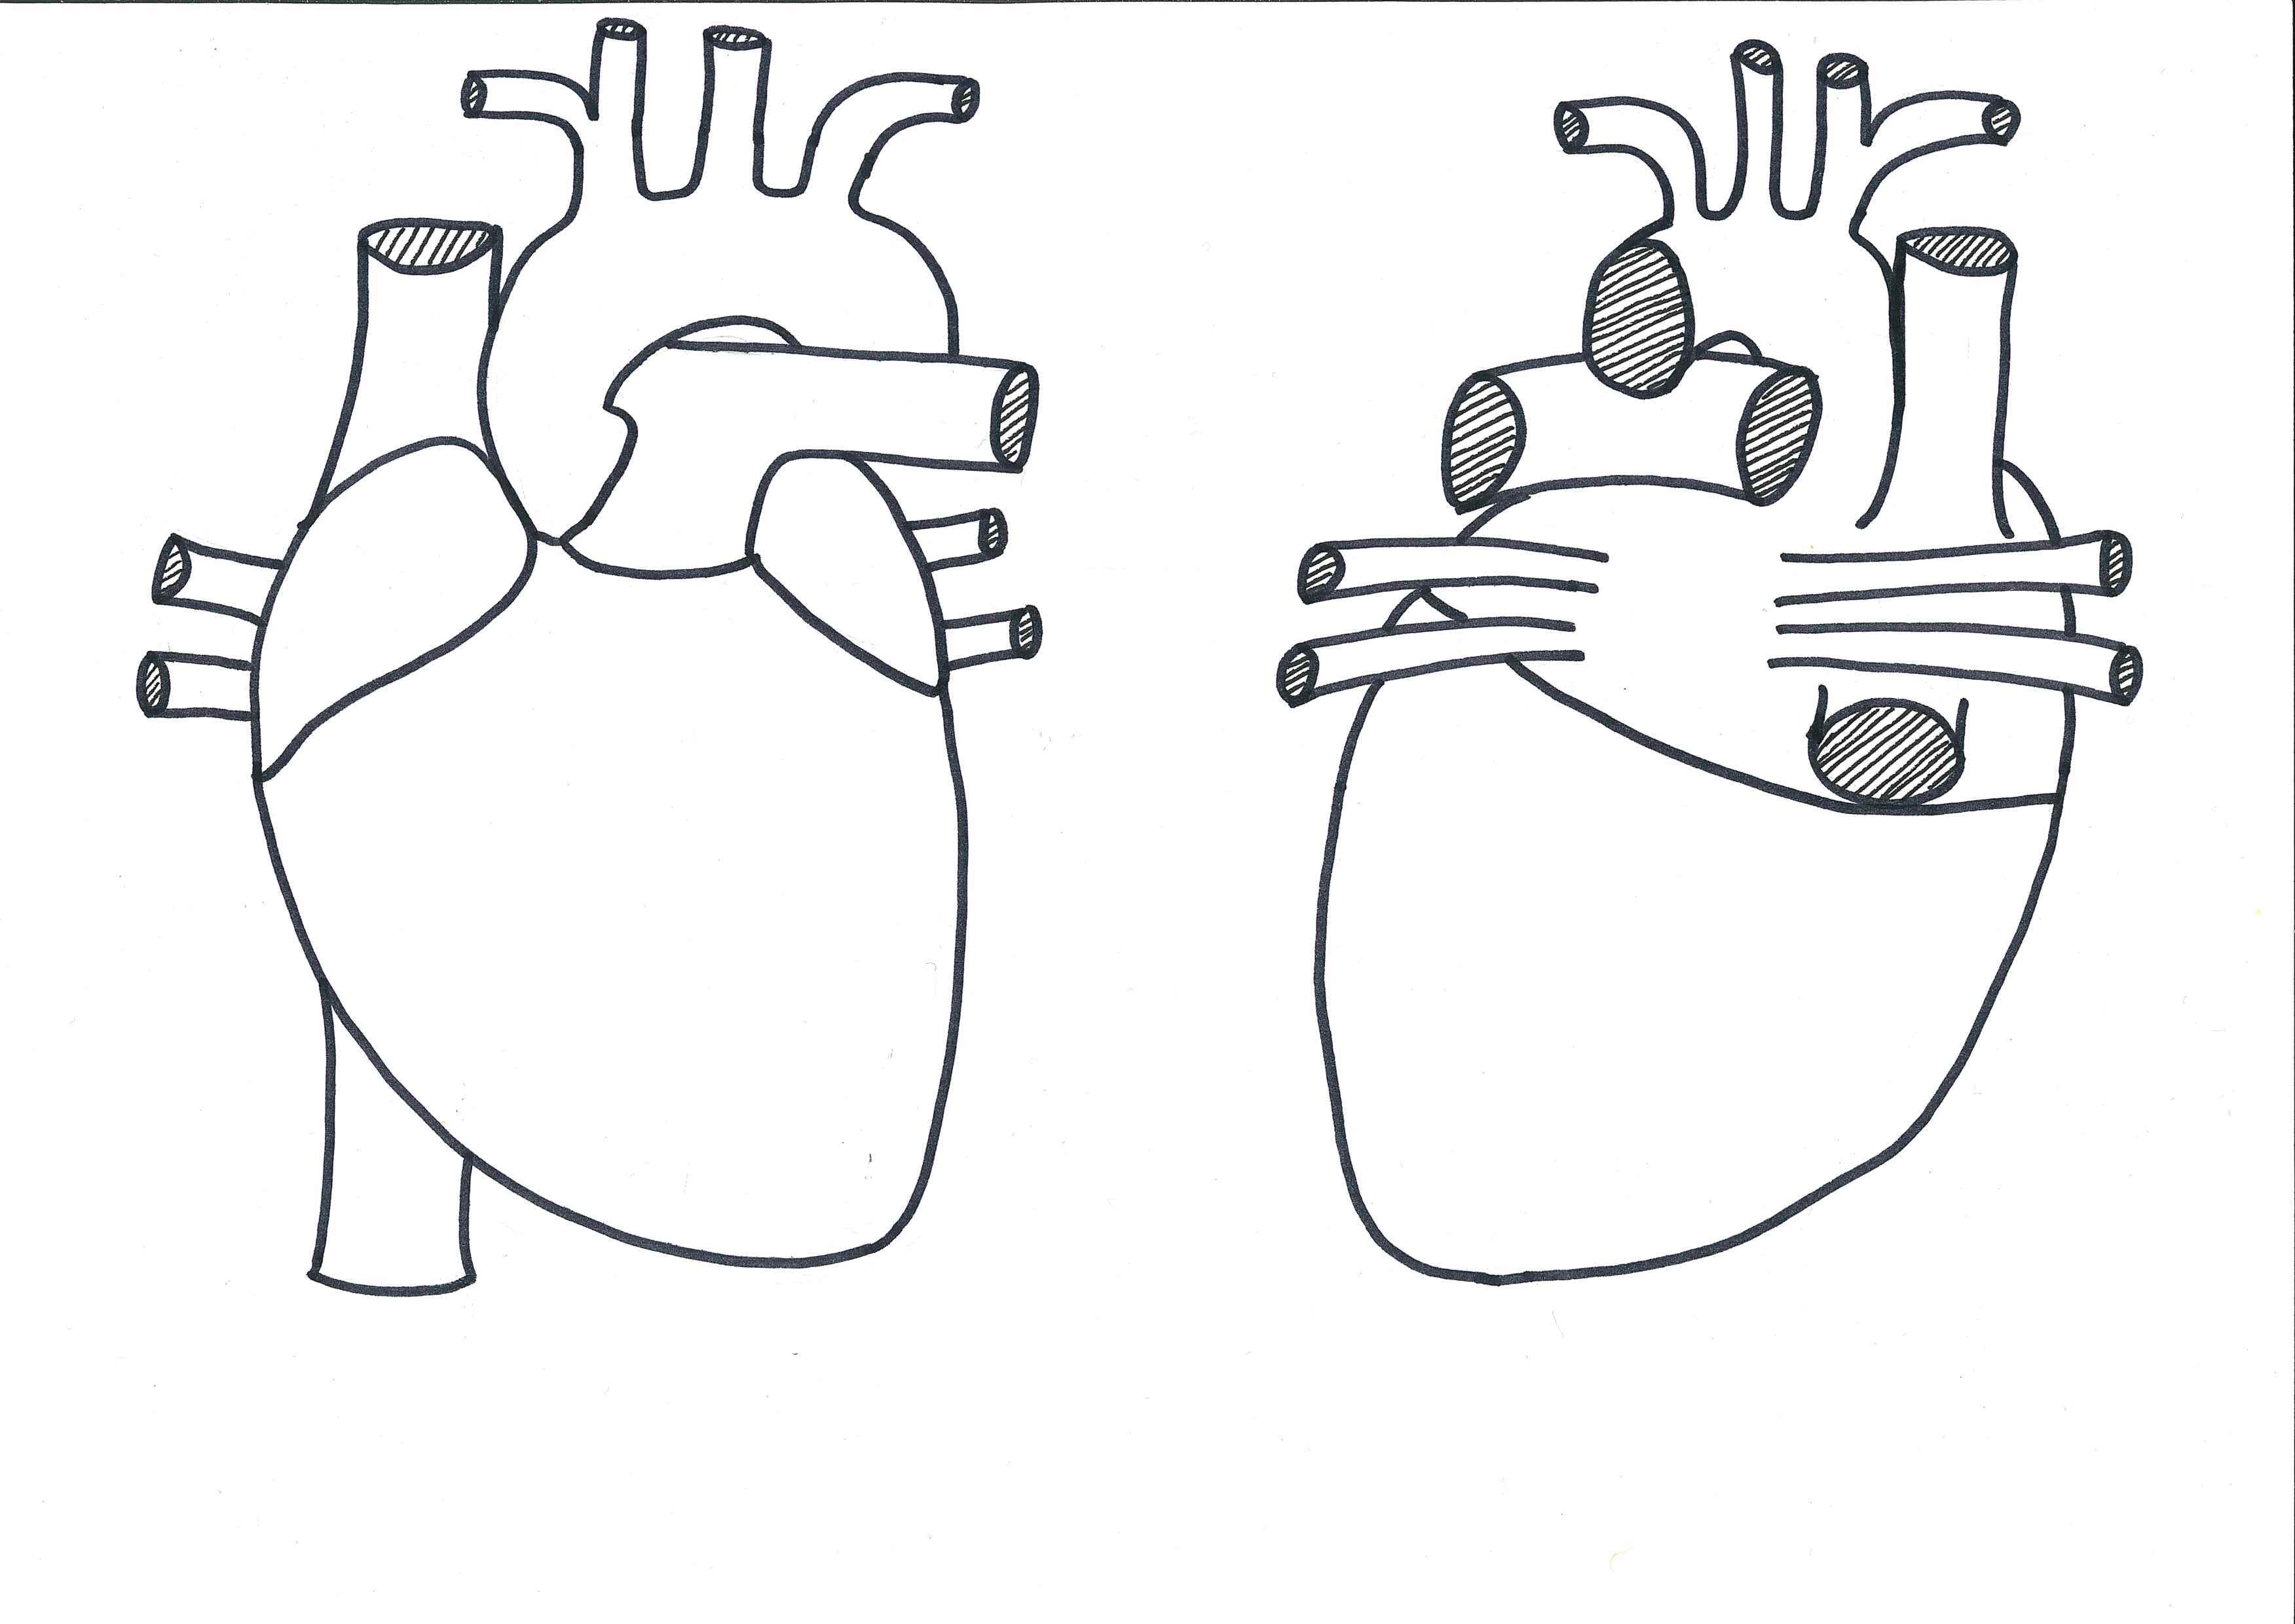 A drawing of the heart as seen from anterior and posterior, no labels